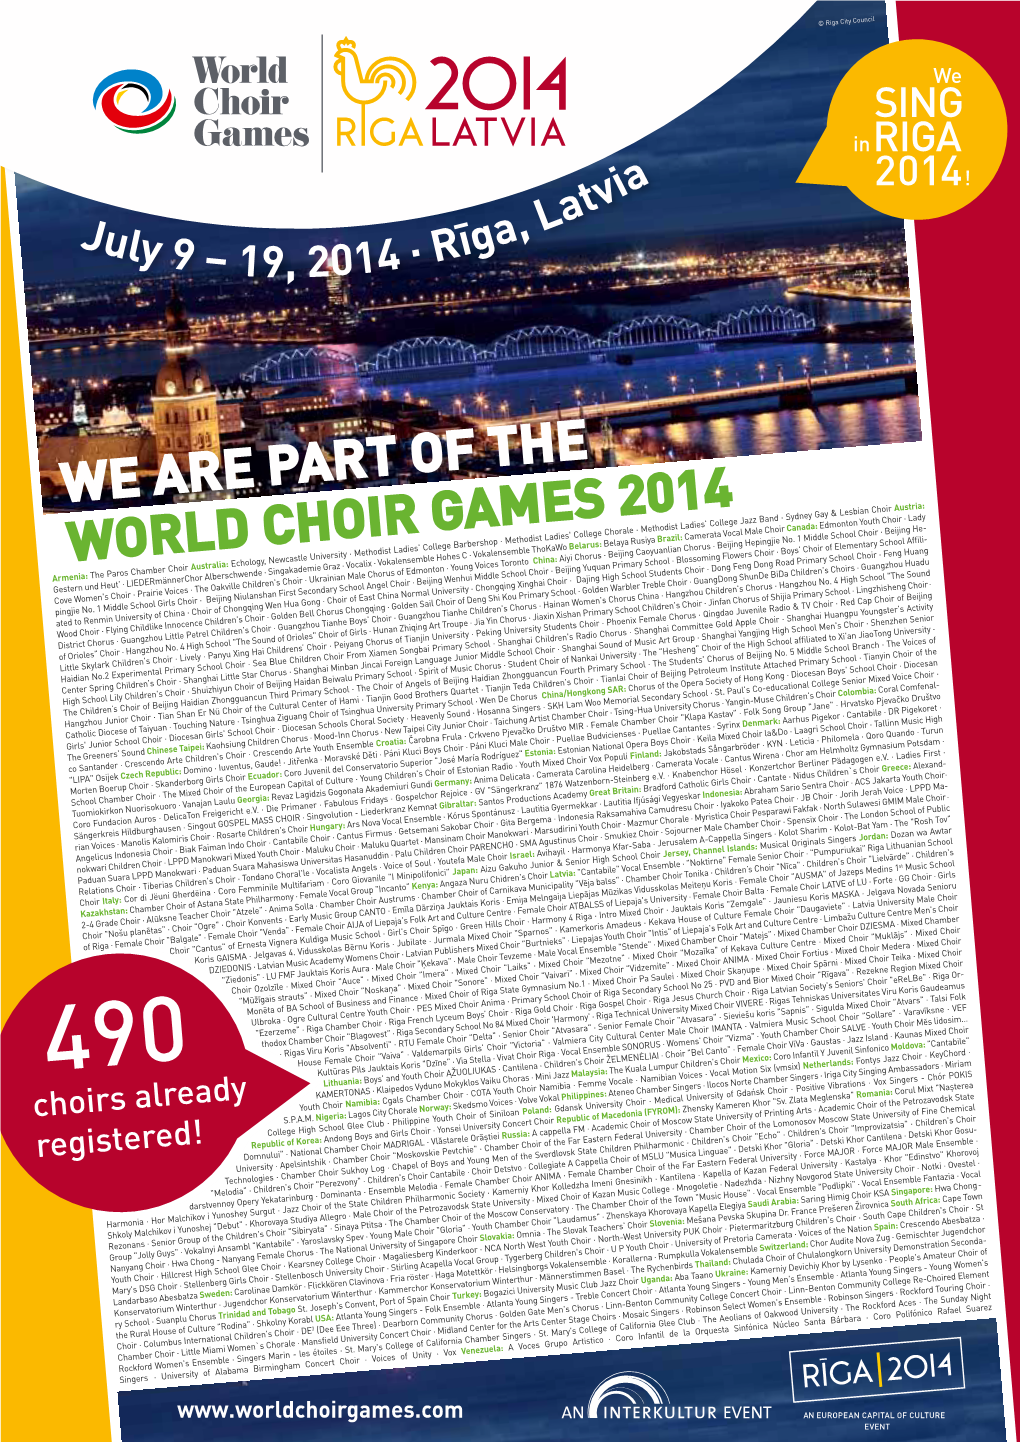 We Are Part of the World Choir Games